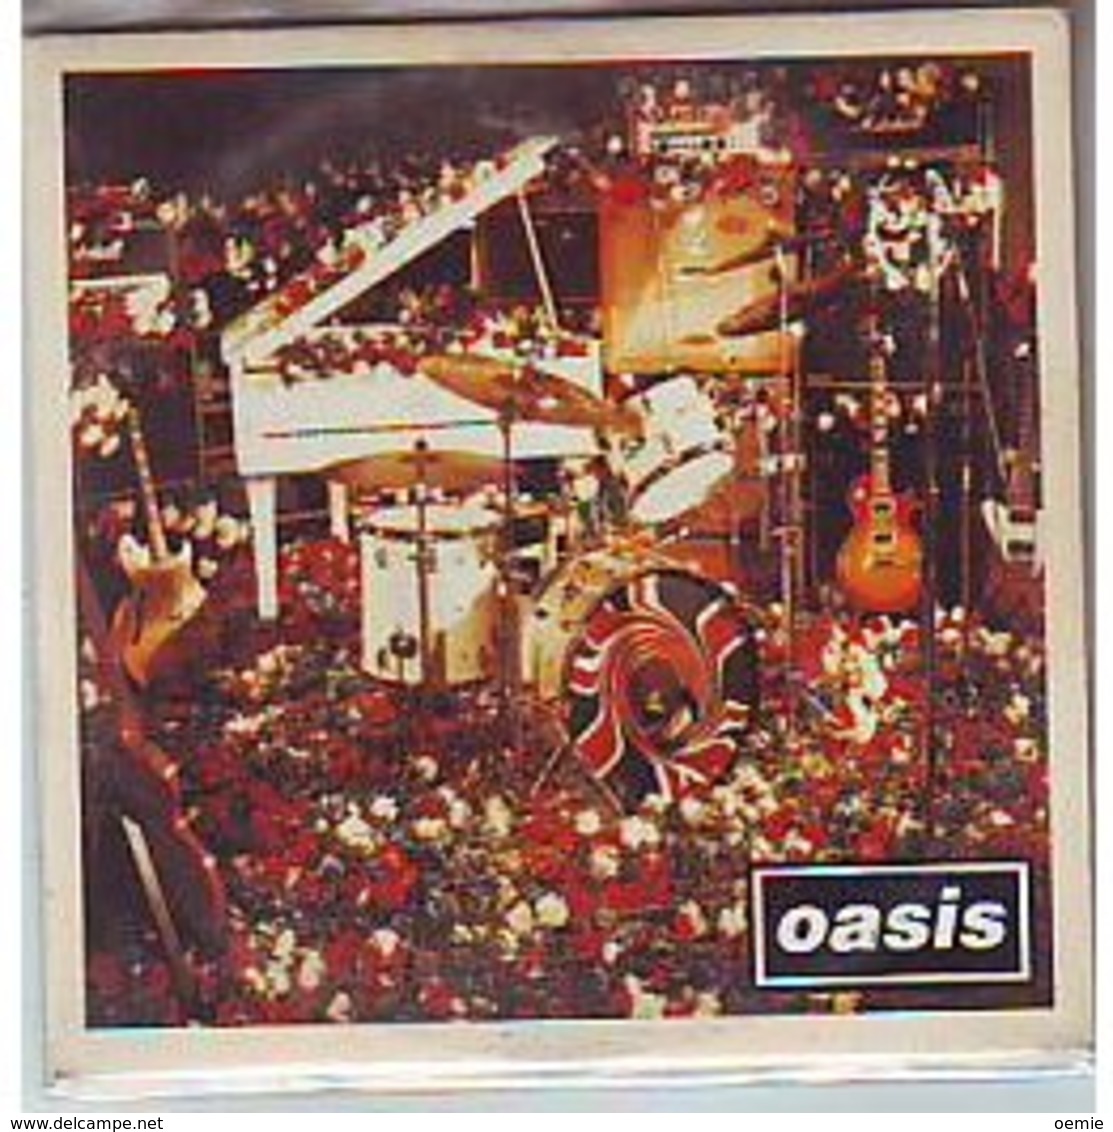 OASIS   COLLECTION DE 3 CD SINGLES - Complete Collections